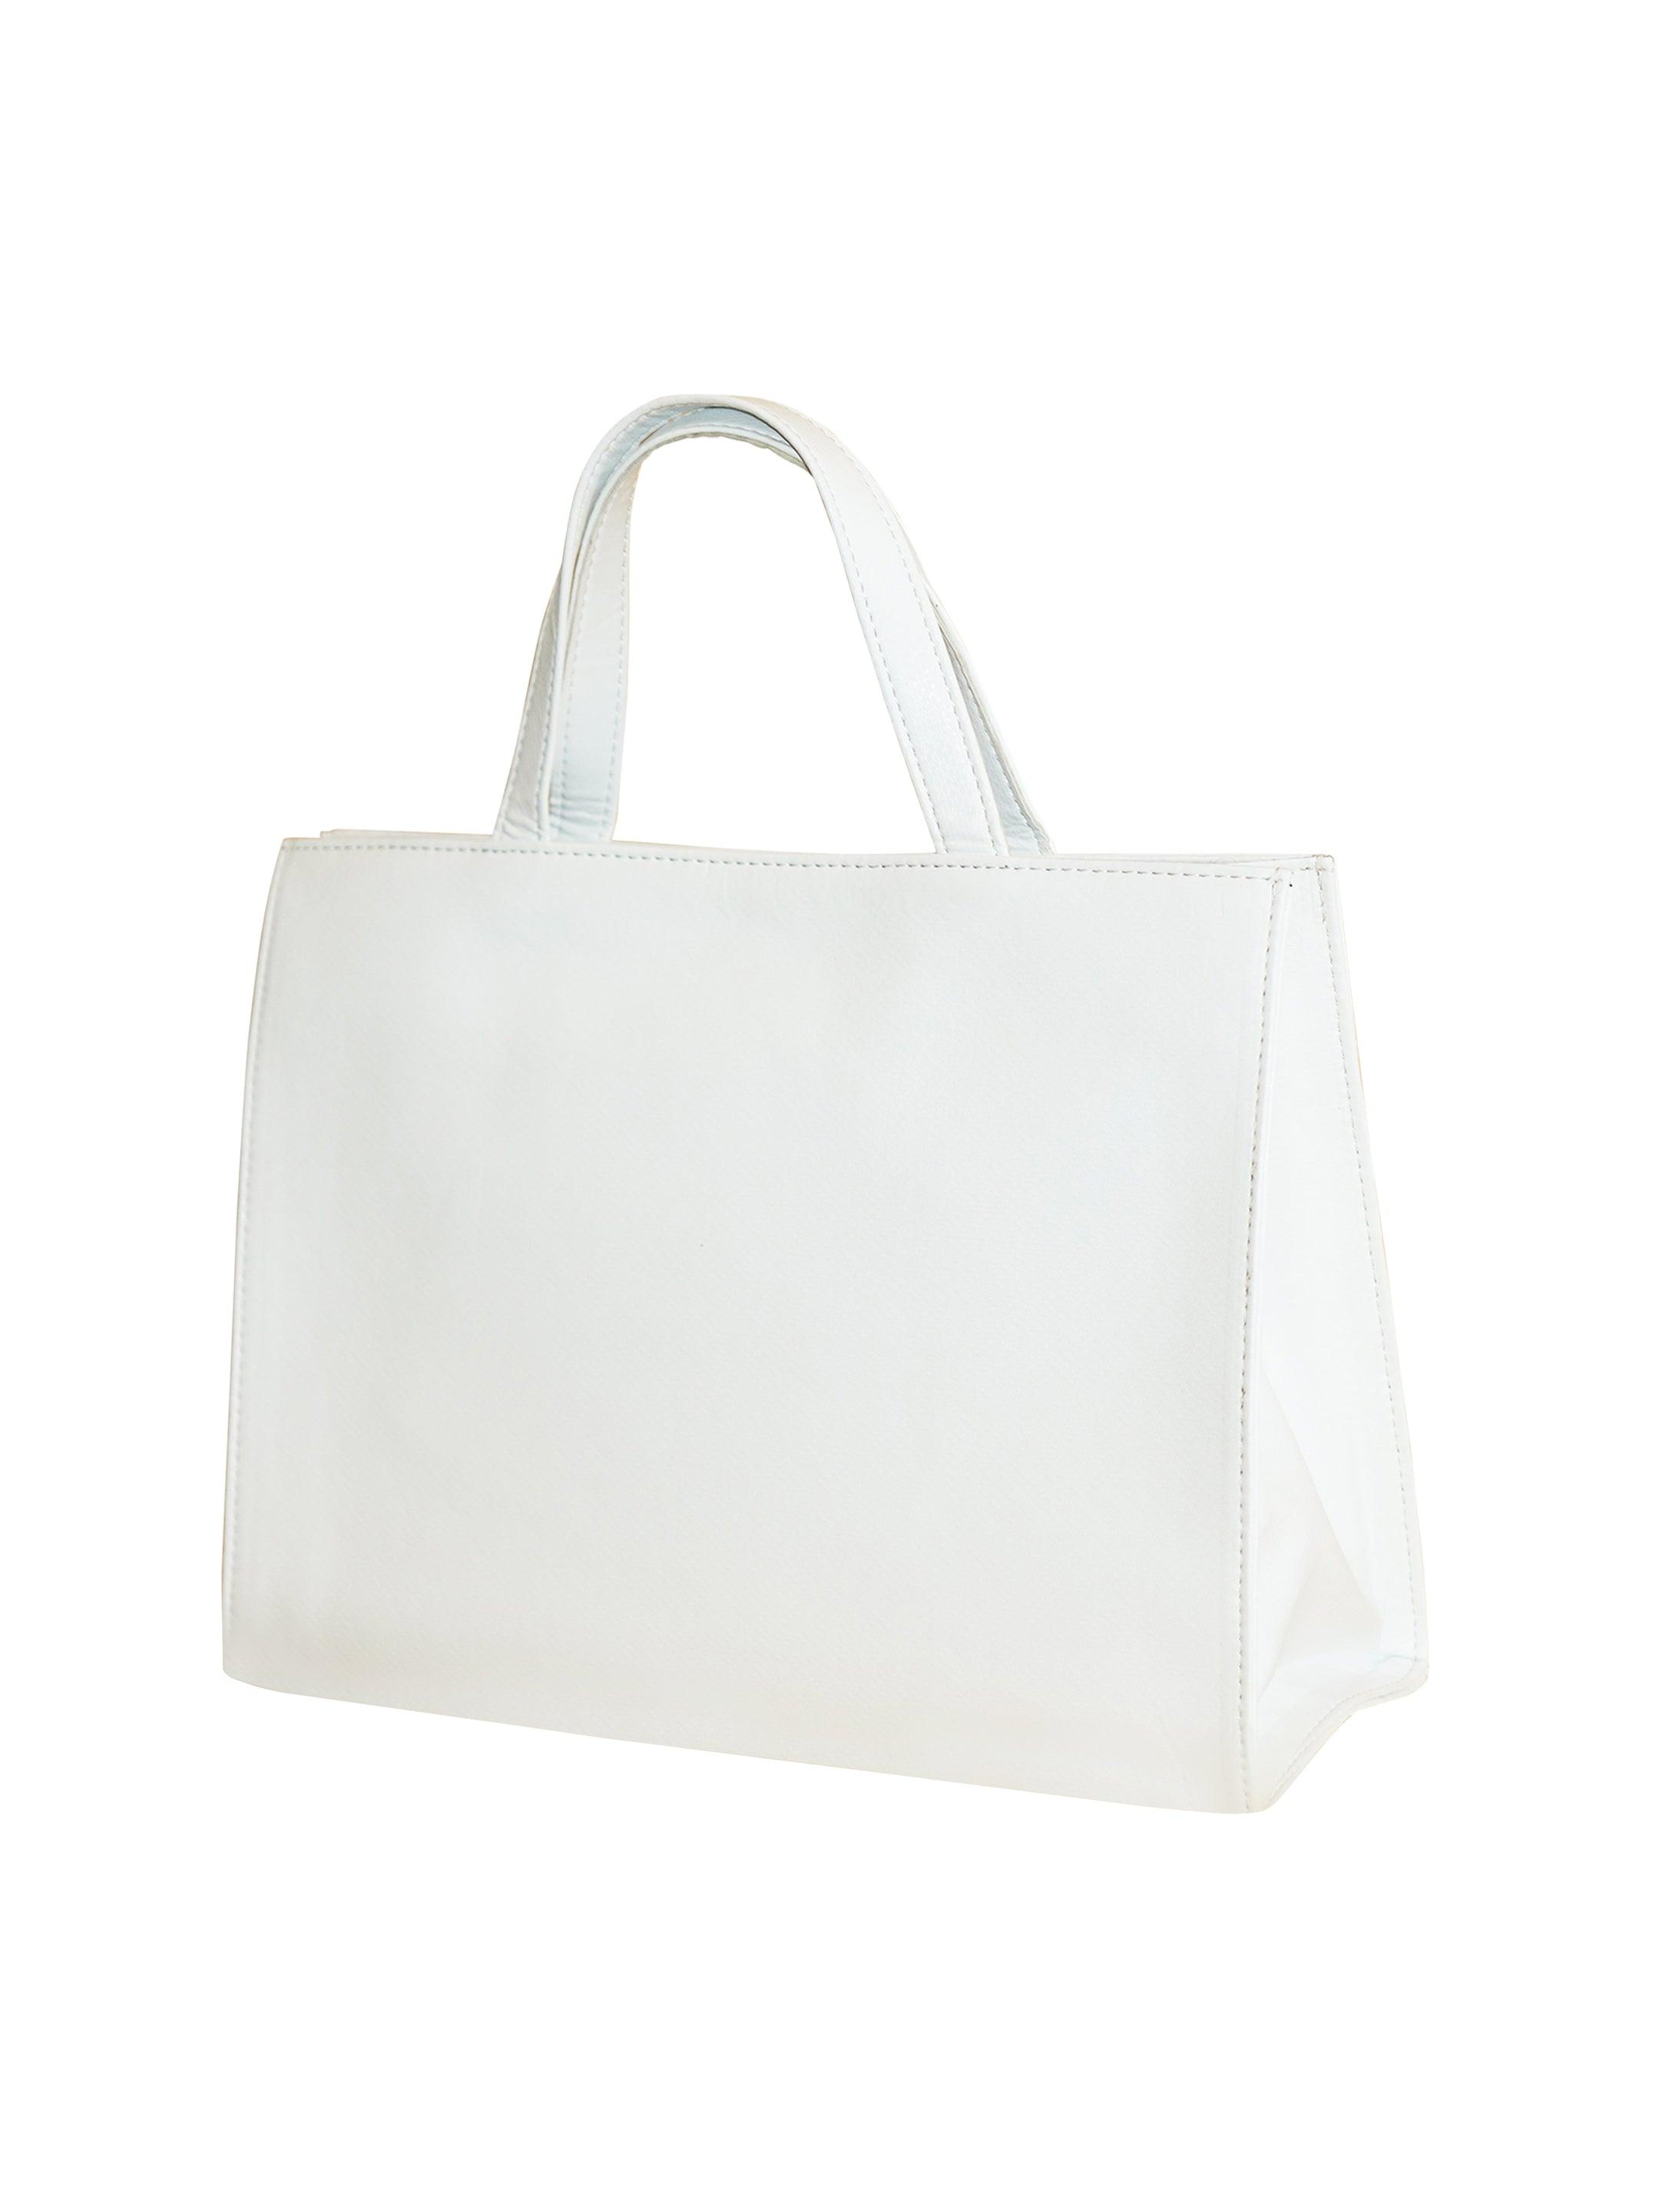 WHITE LEATHER BAG 